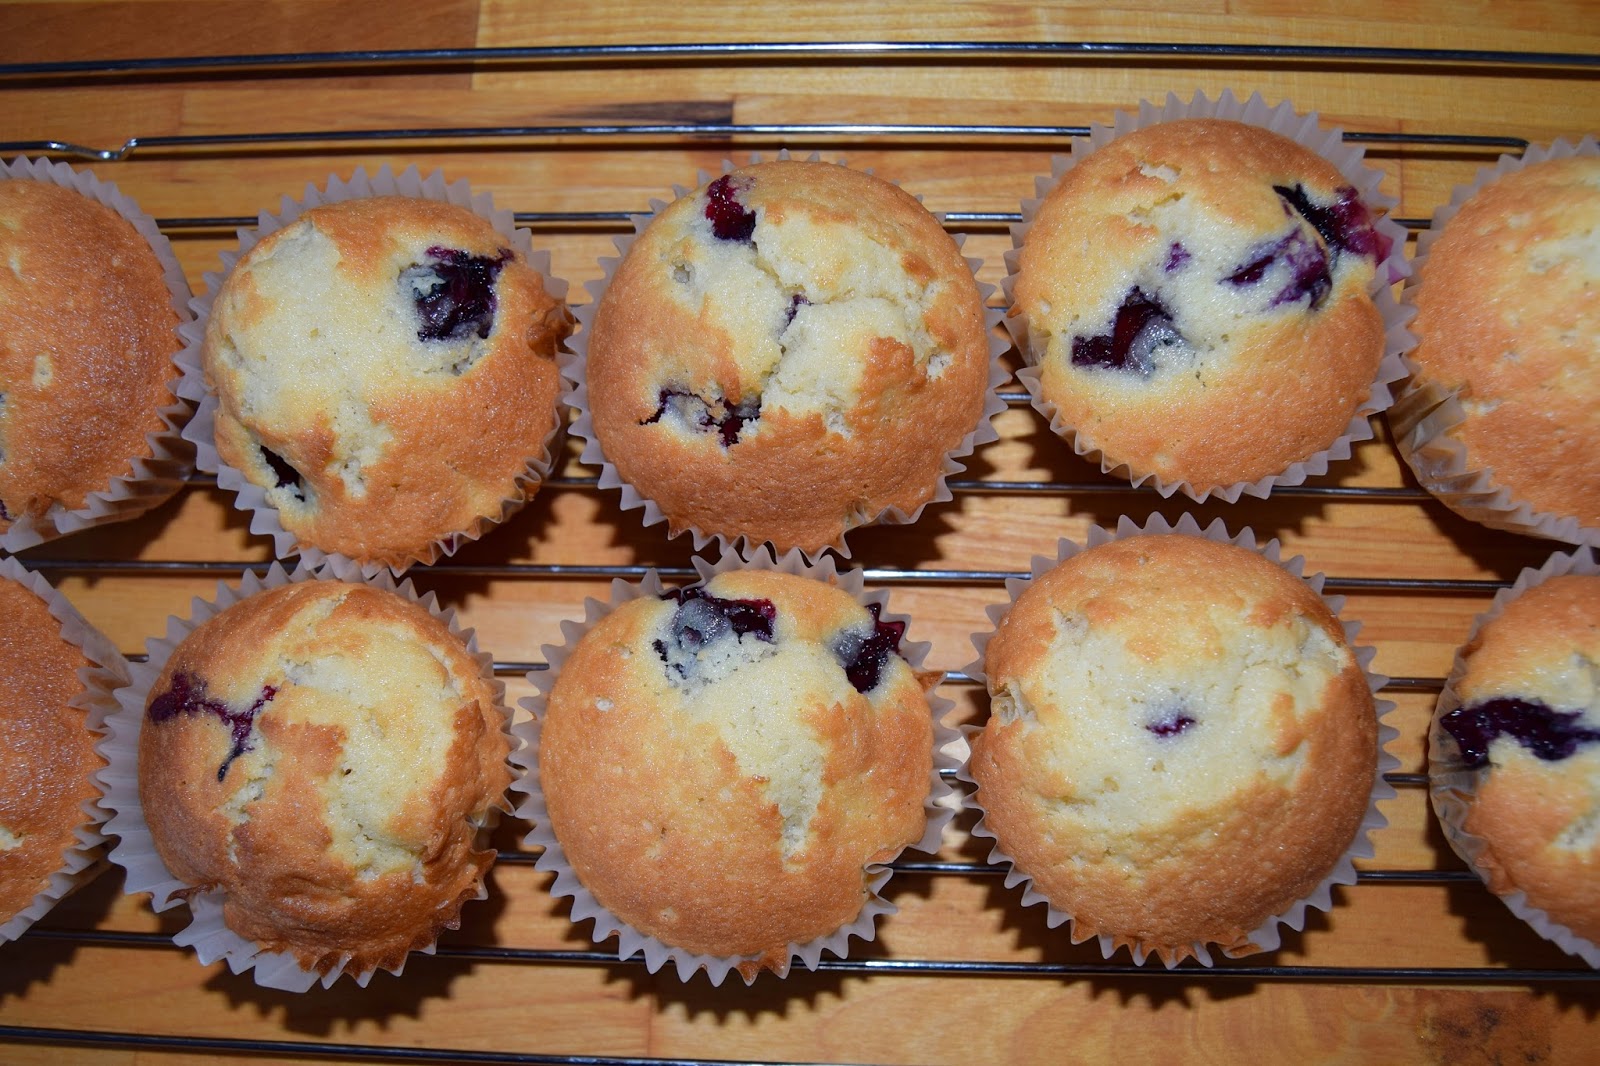 Blueberry Muffins: The Best Muffins I Have Ever Made